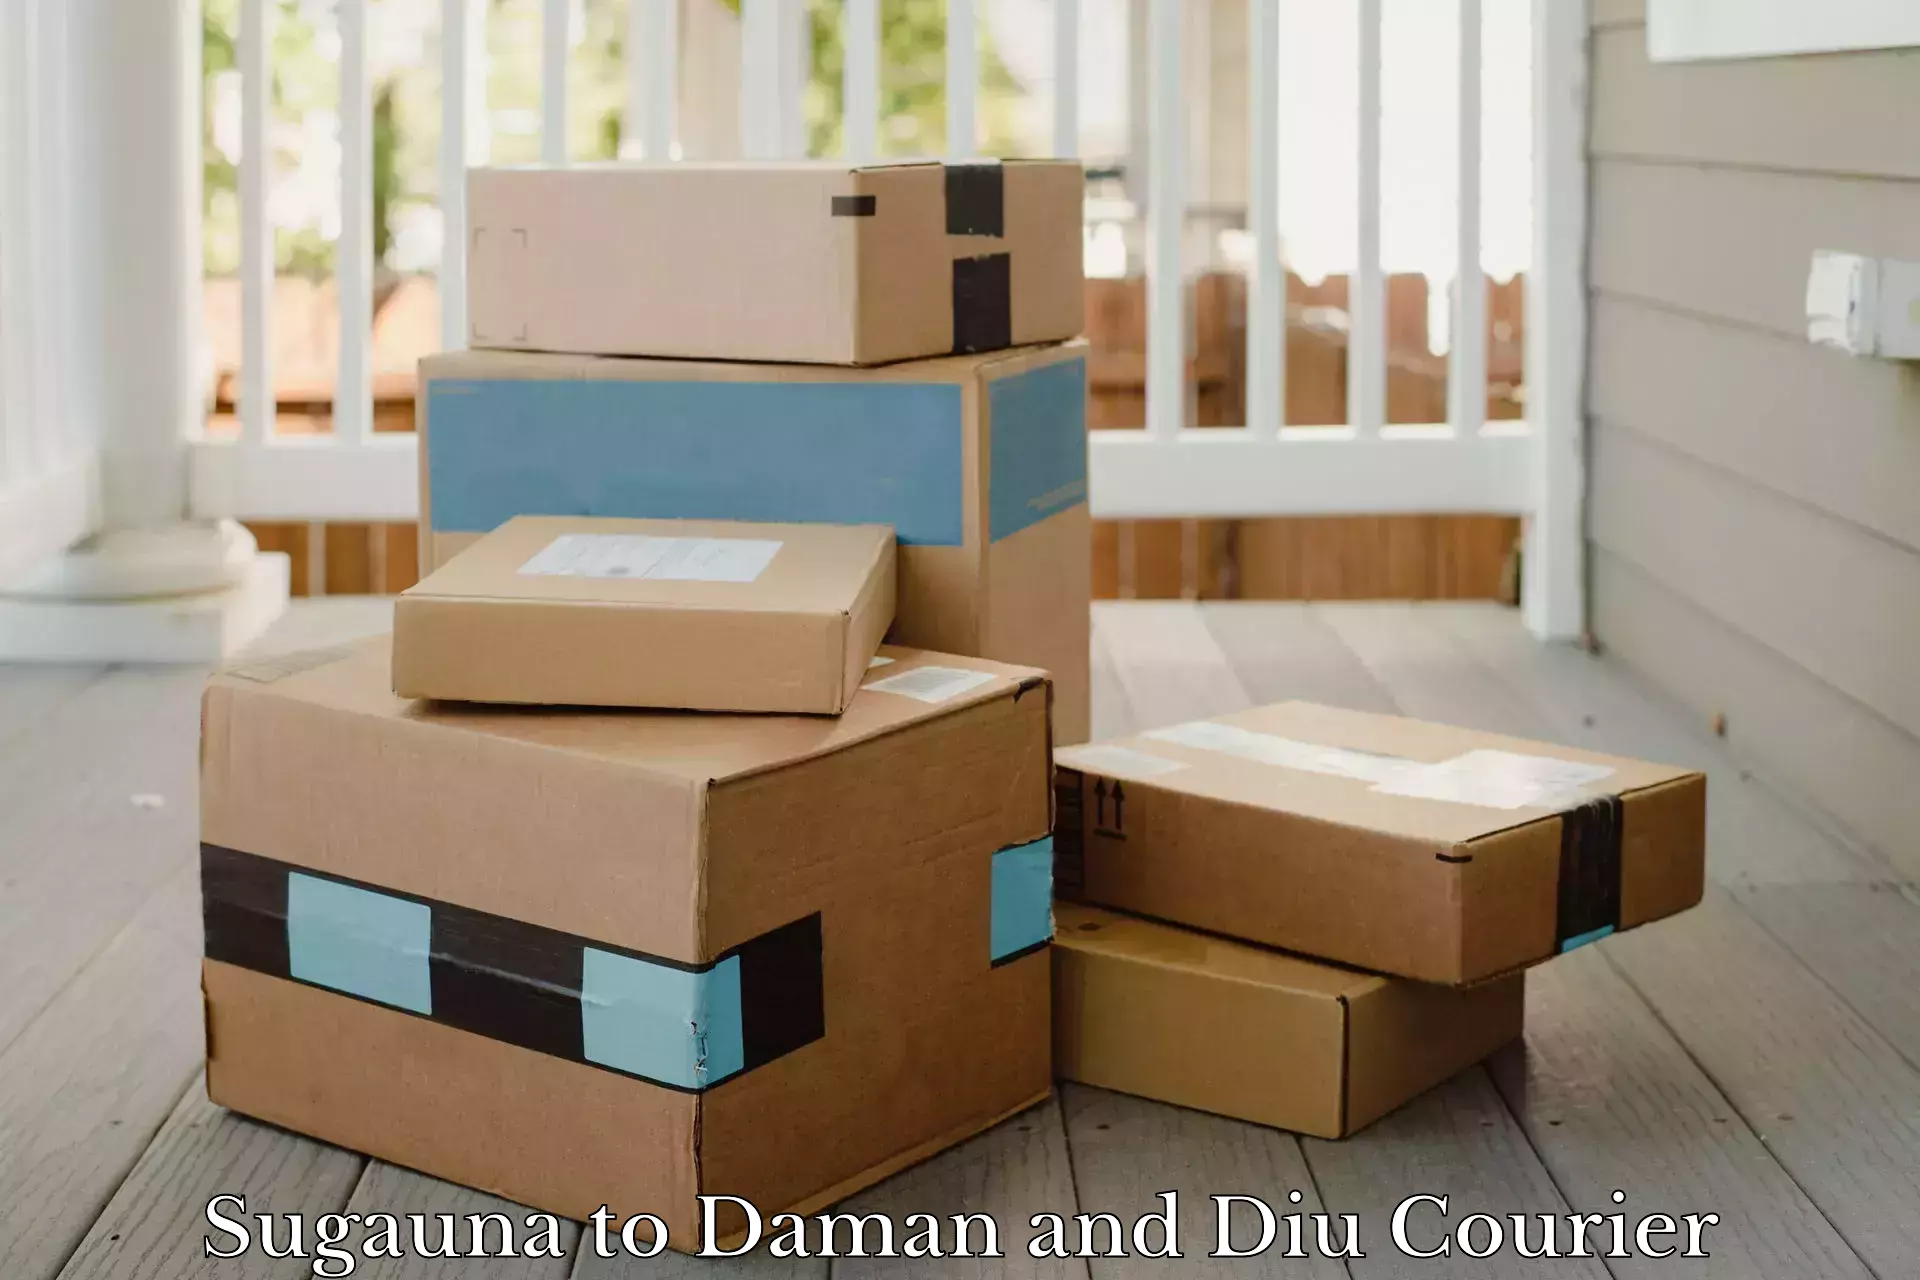 State-of-the-art courier technology Sugauna to Daman and Diu